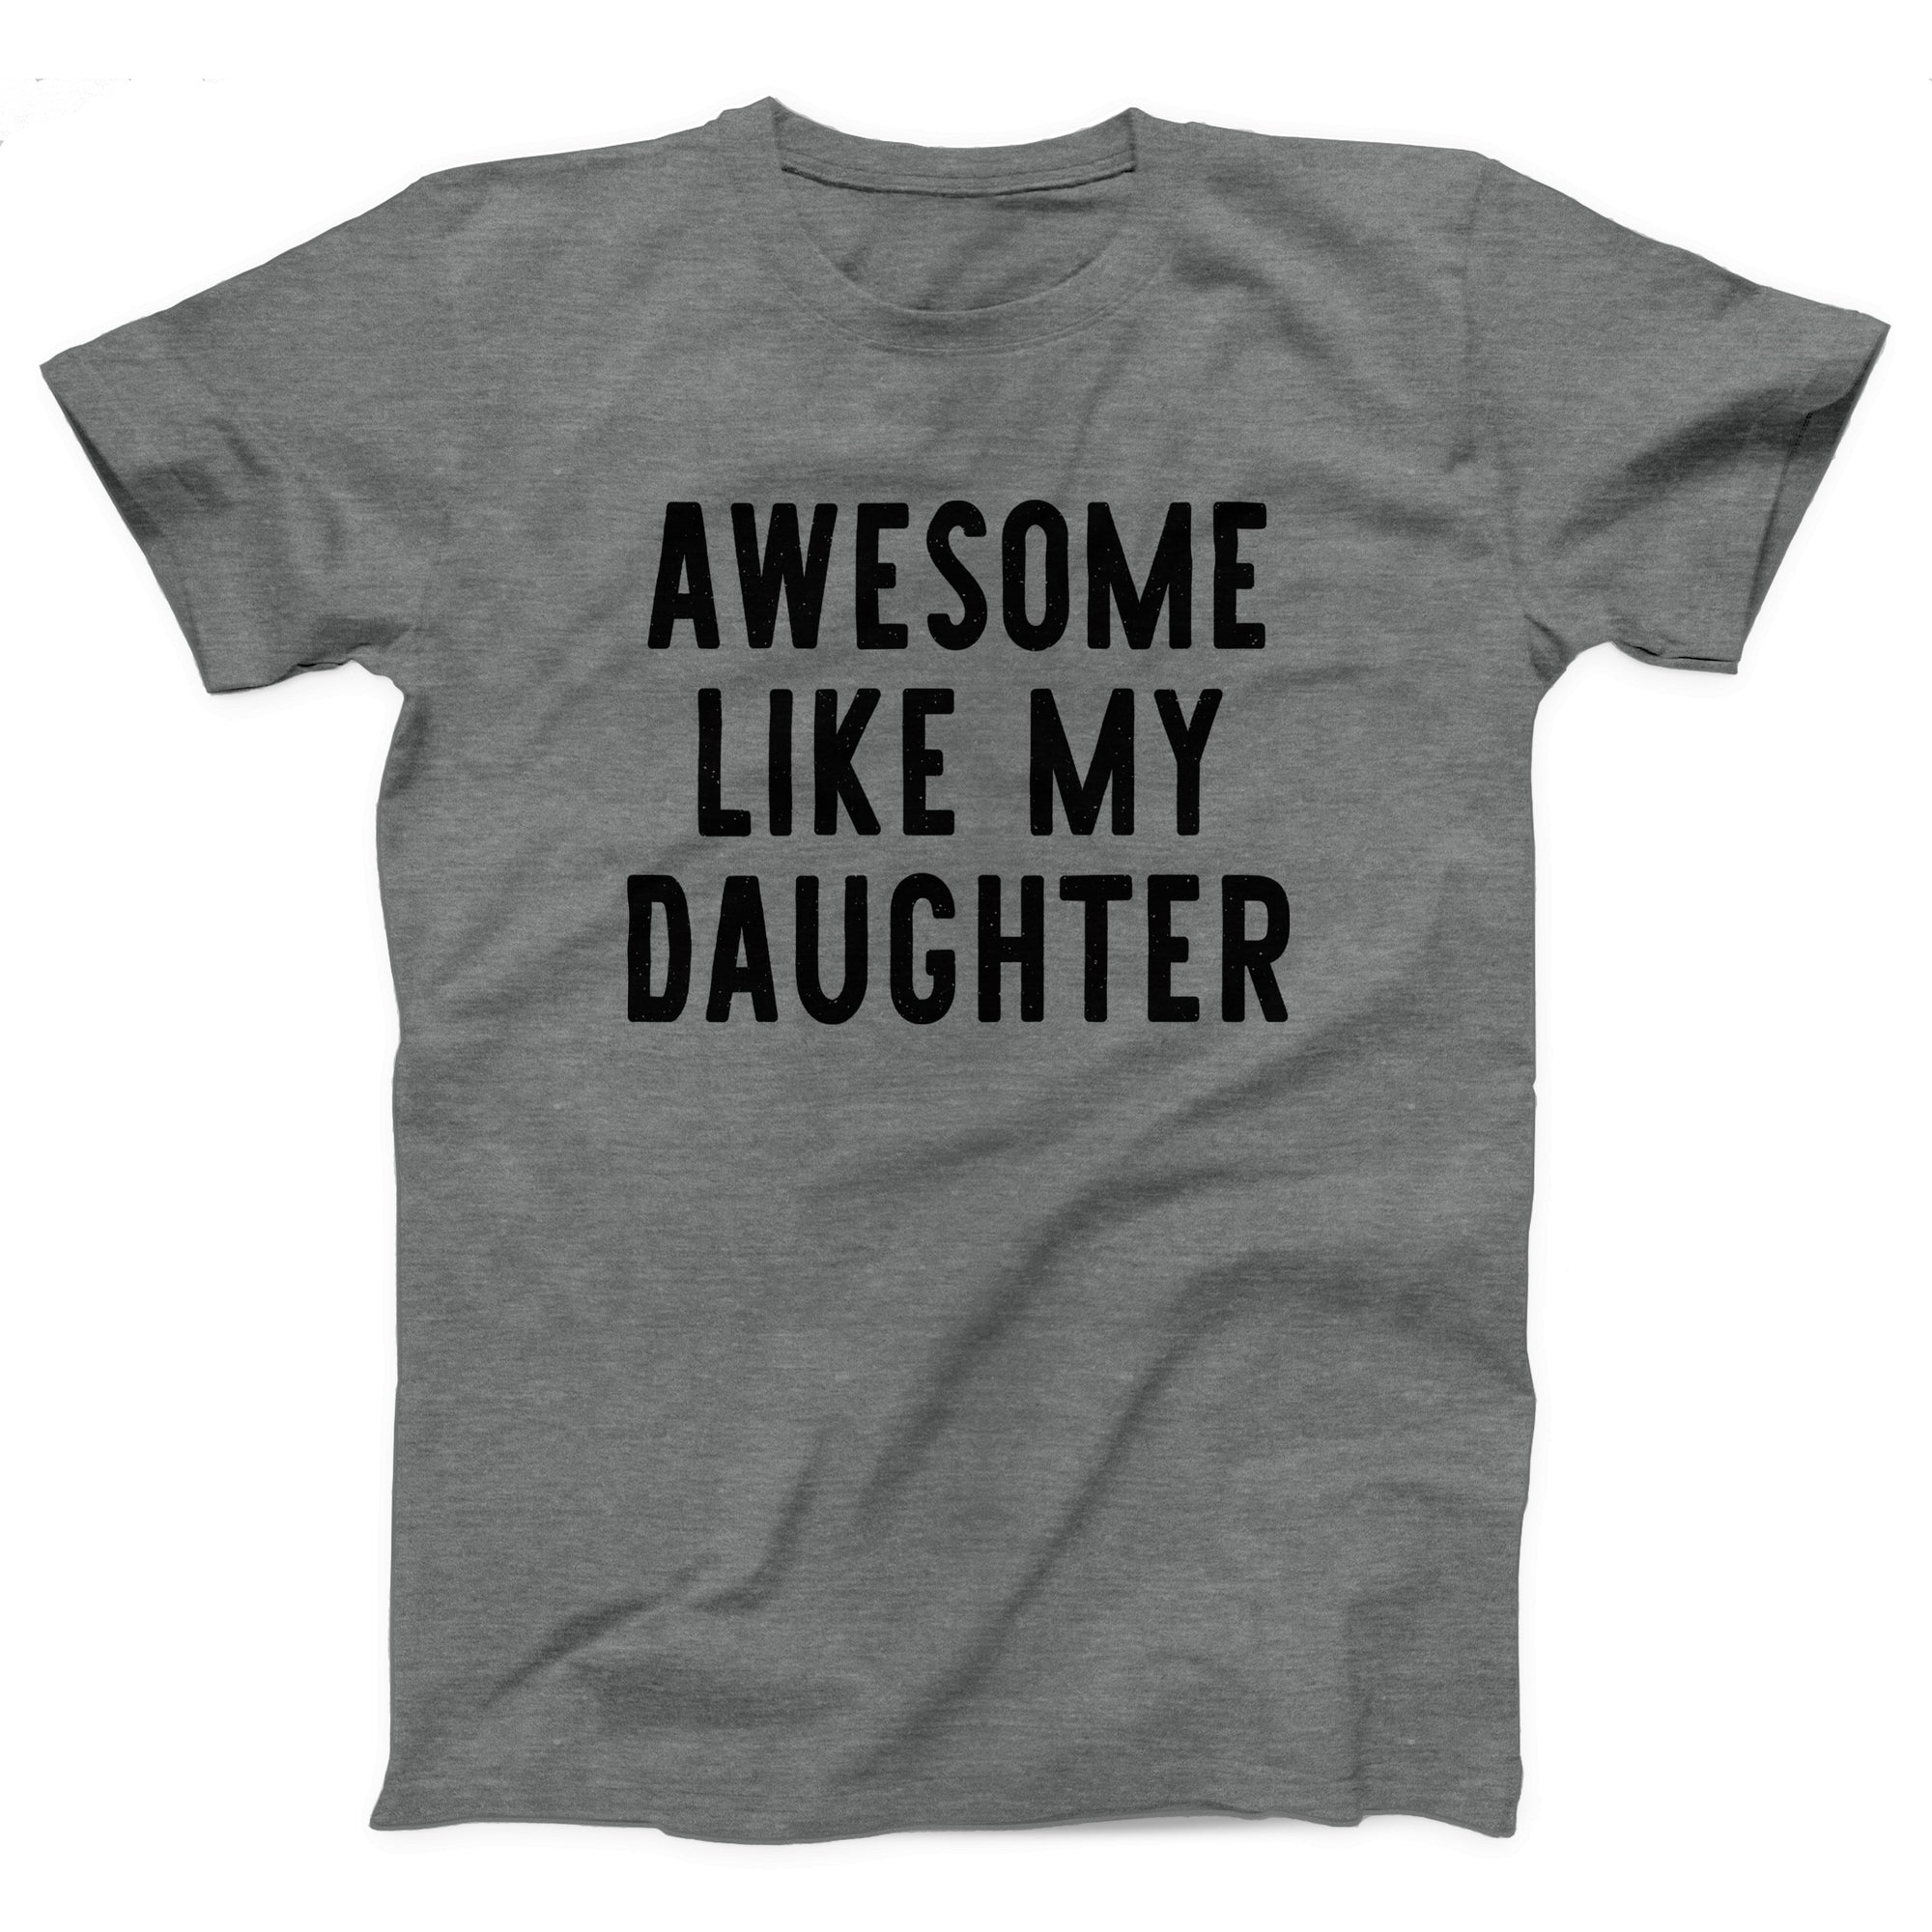 Awesome Like My Daughter Adult Unisex T-Shirt - anishphilip